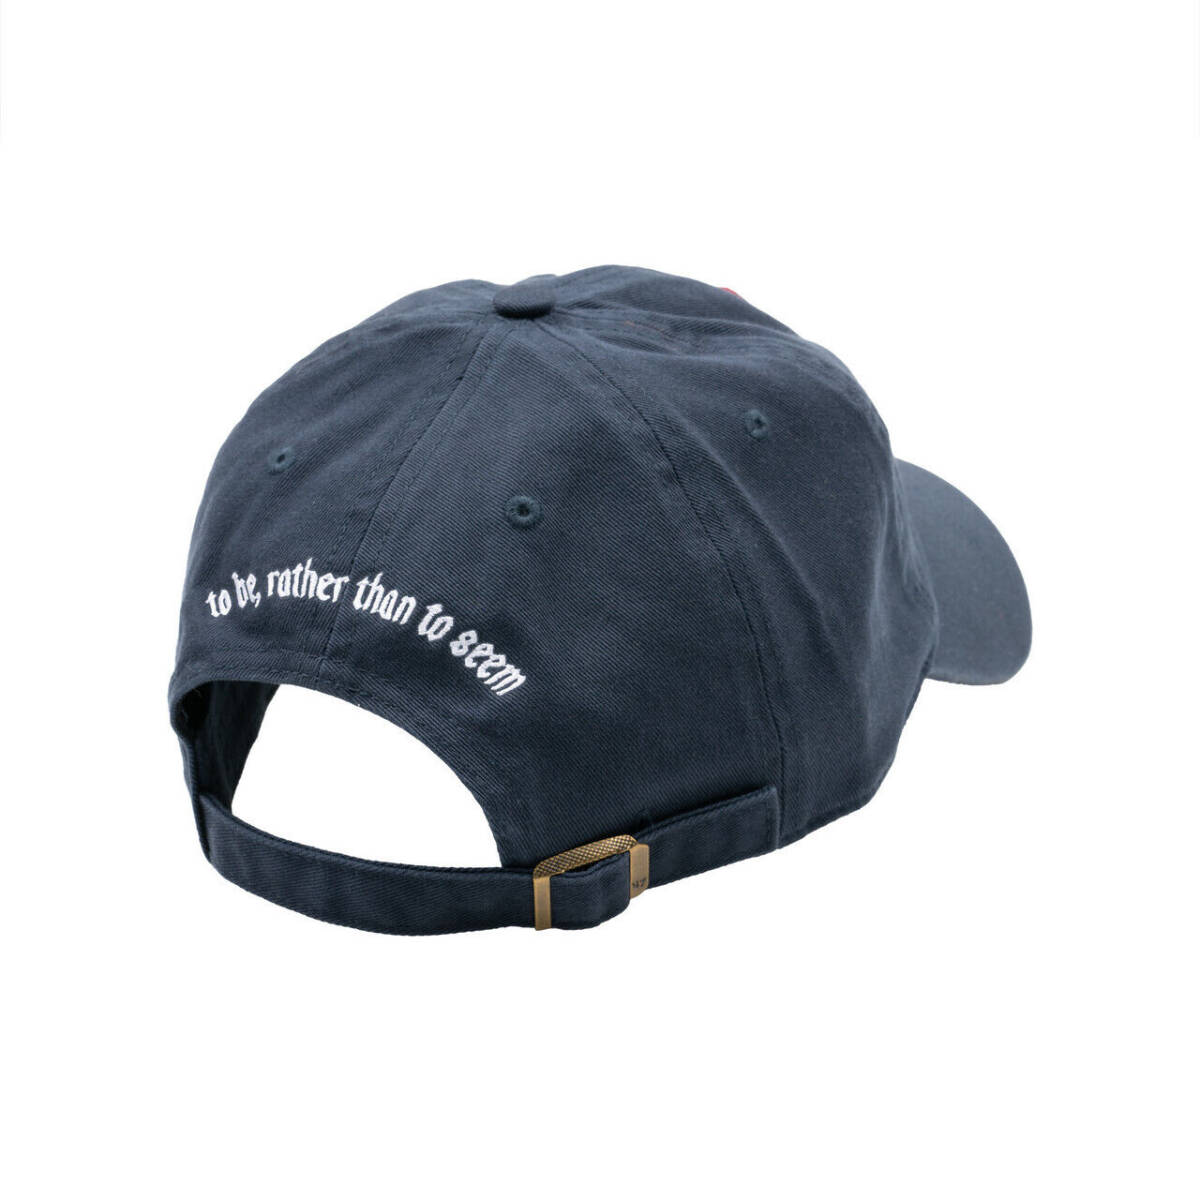 Spiritus Systems - Motto Ball Cap - Embroidered '47 Clean Up - NOT SupDef WRMFZY 海外 即決の画像3